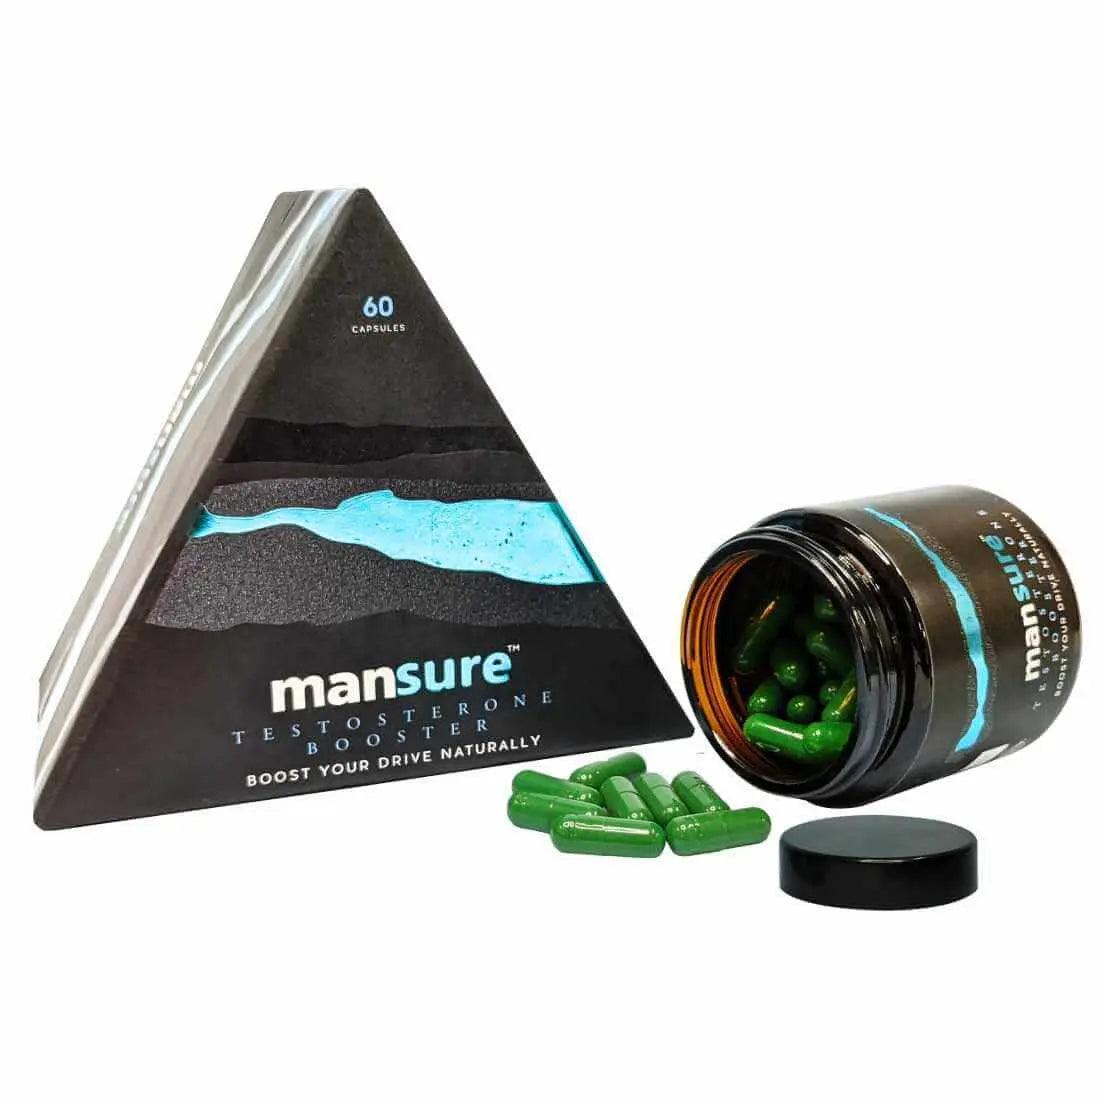 ManSure TESTOSTERONE BOOSTER for Men's Health - 60 Capsules 8906116280508